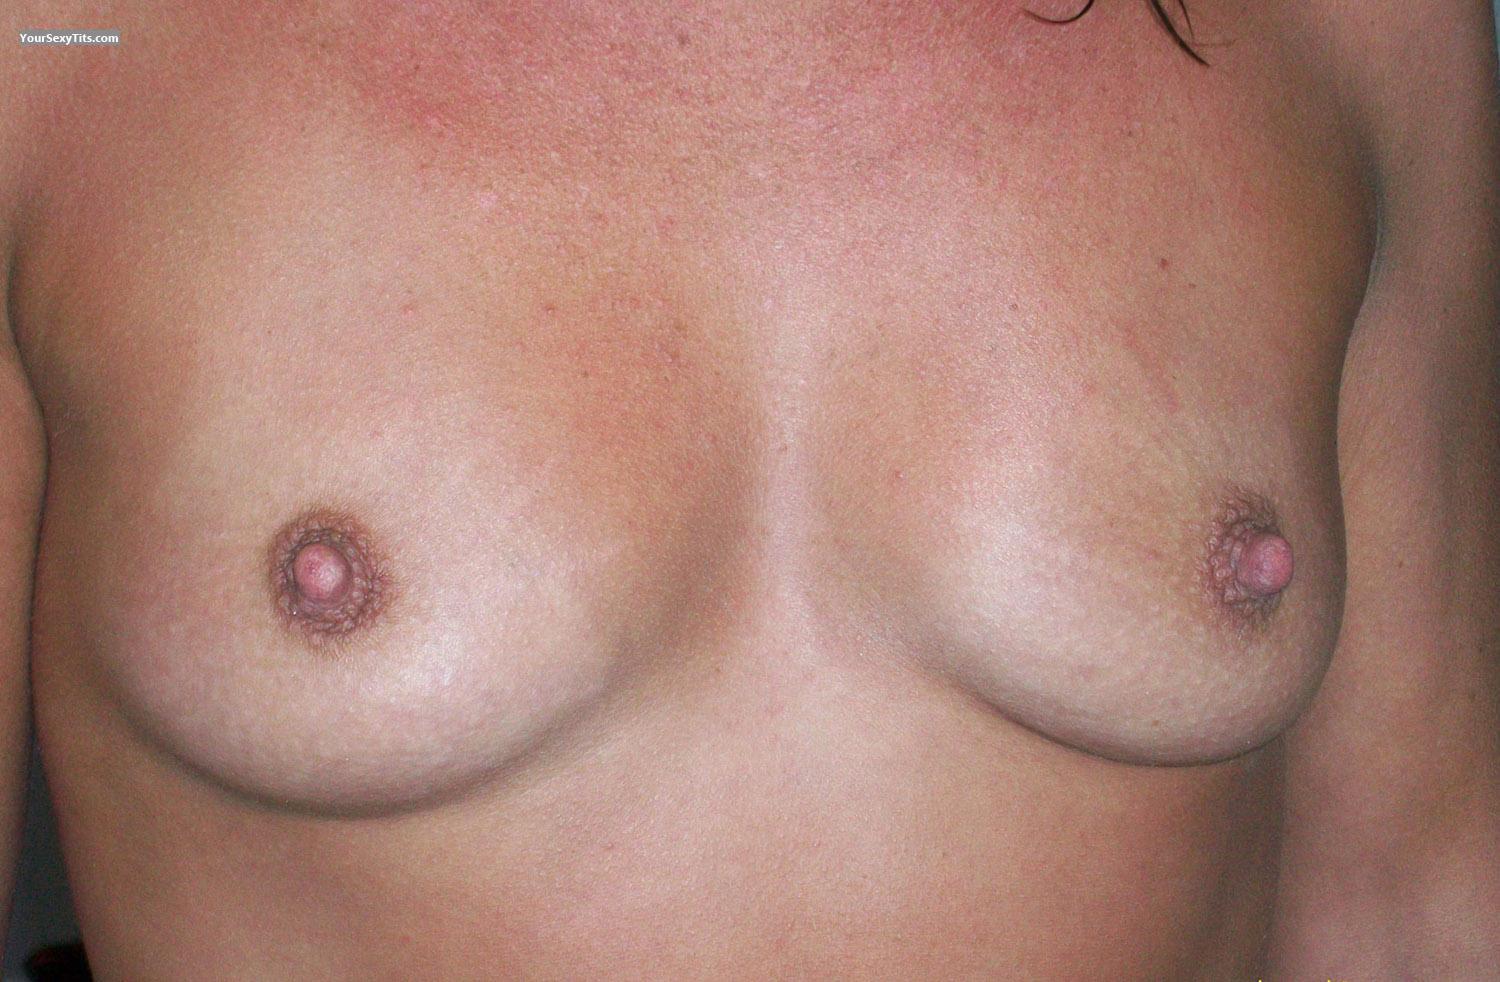 Tit Flash: Very Small Tits - Liz from United States